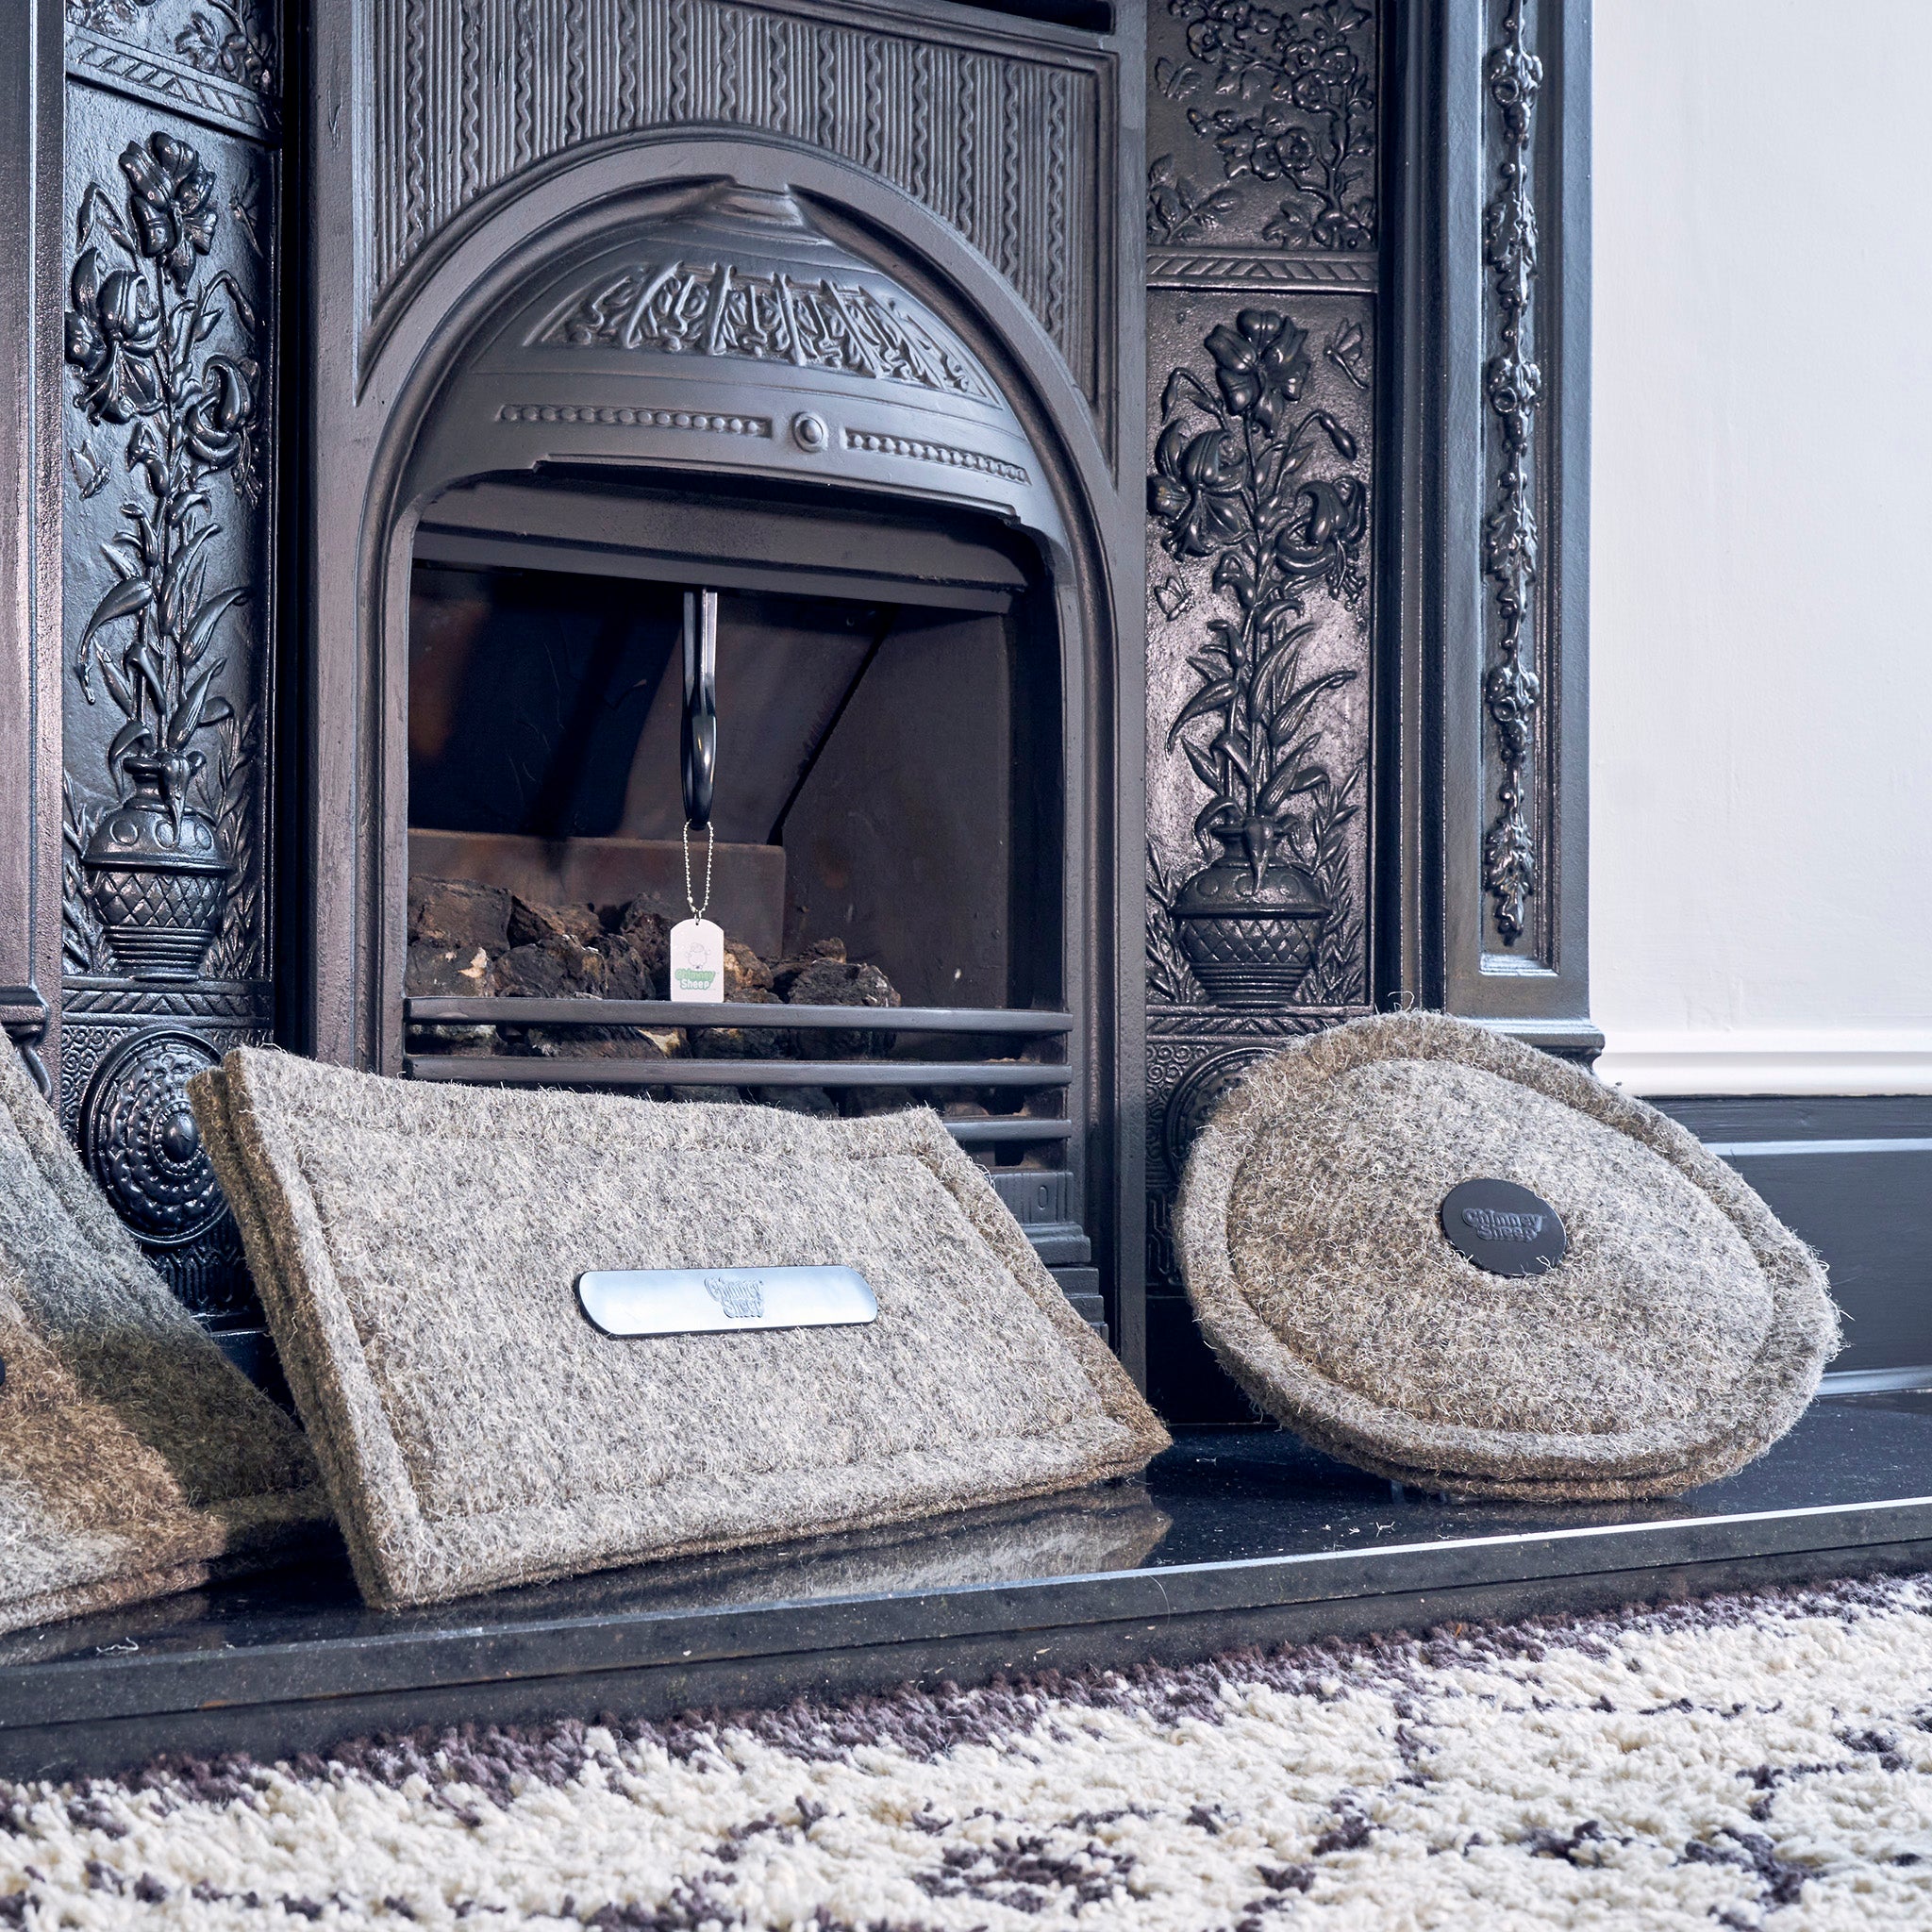 Two Chimney Sheep draught excluders in front of a fireplace.